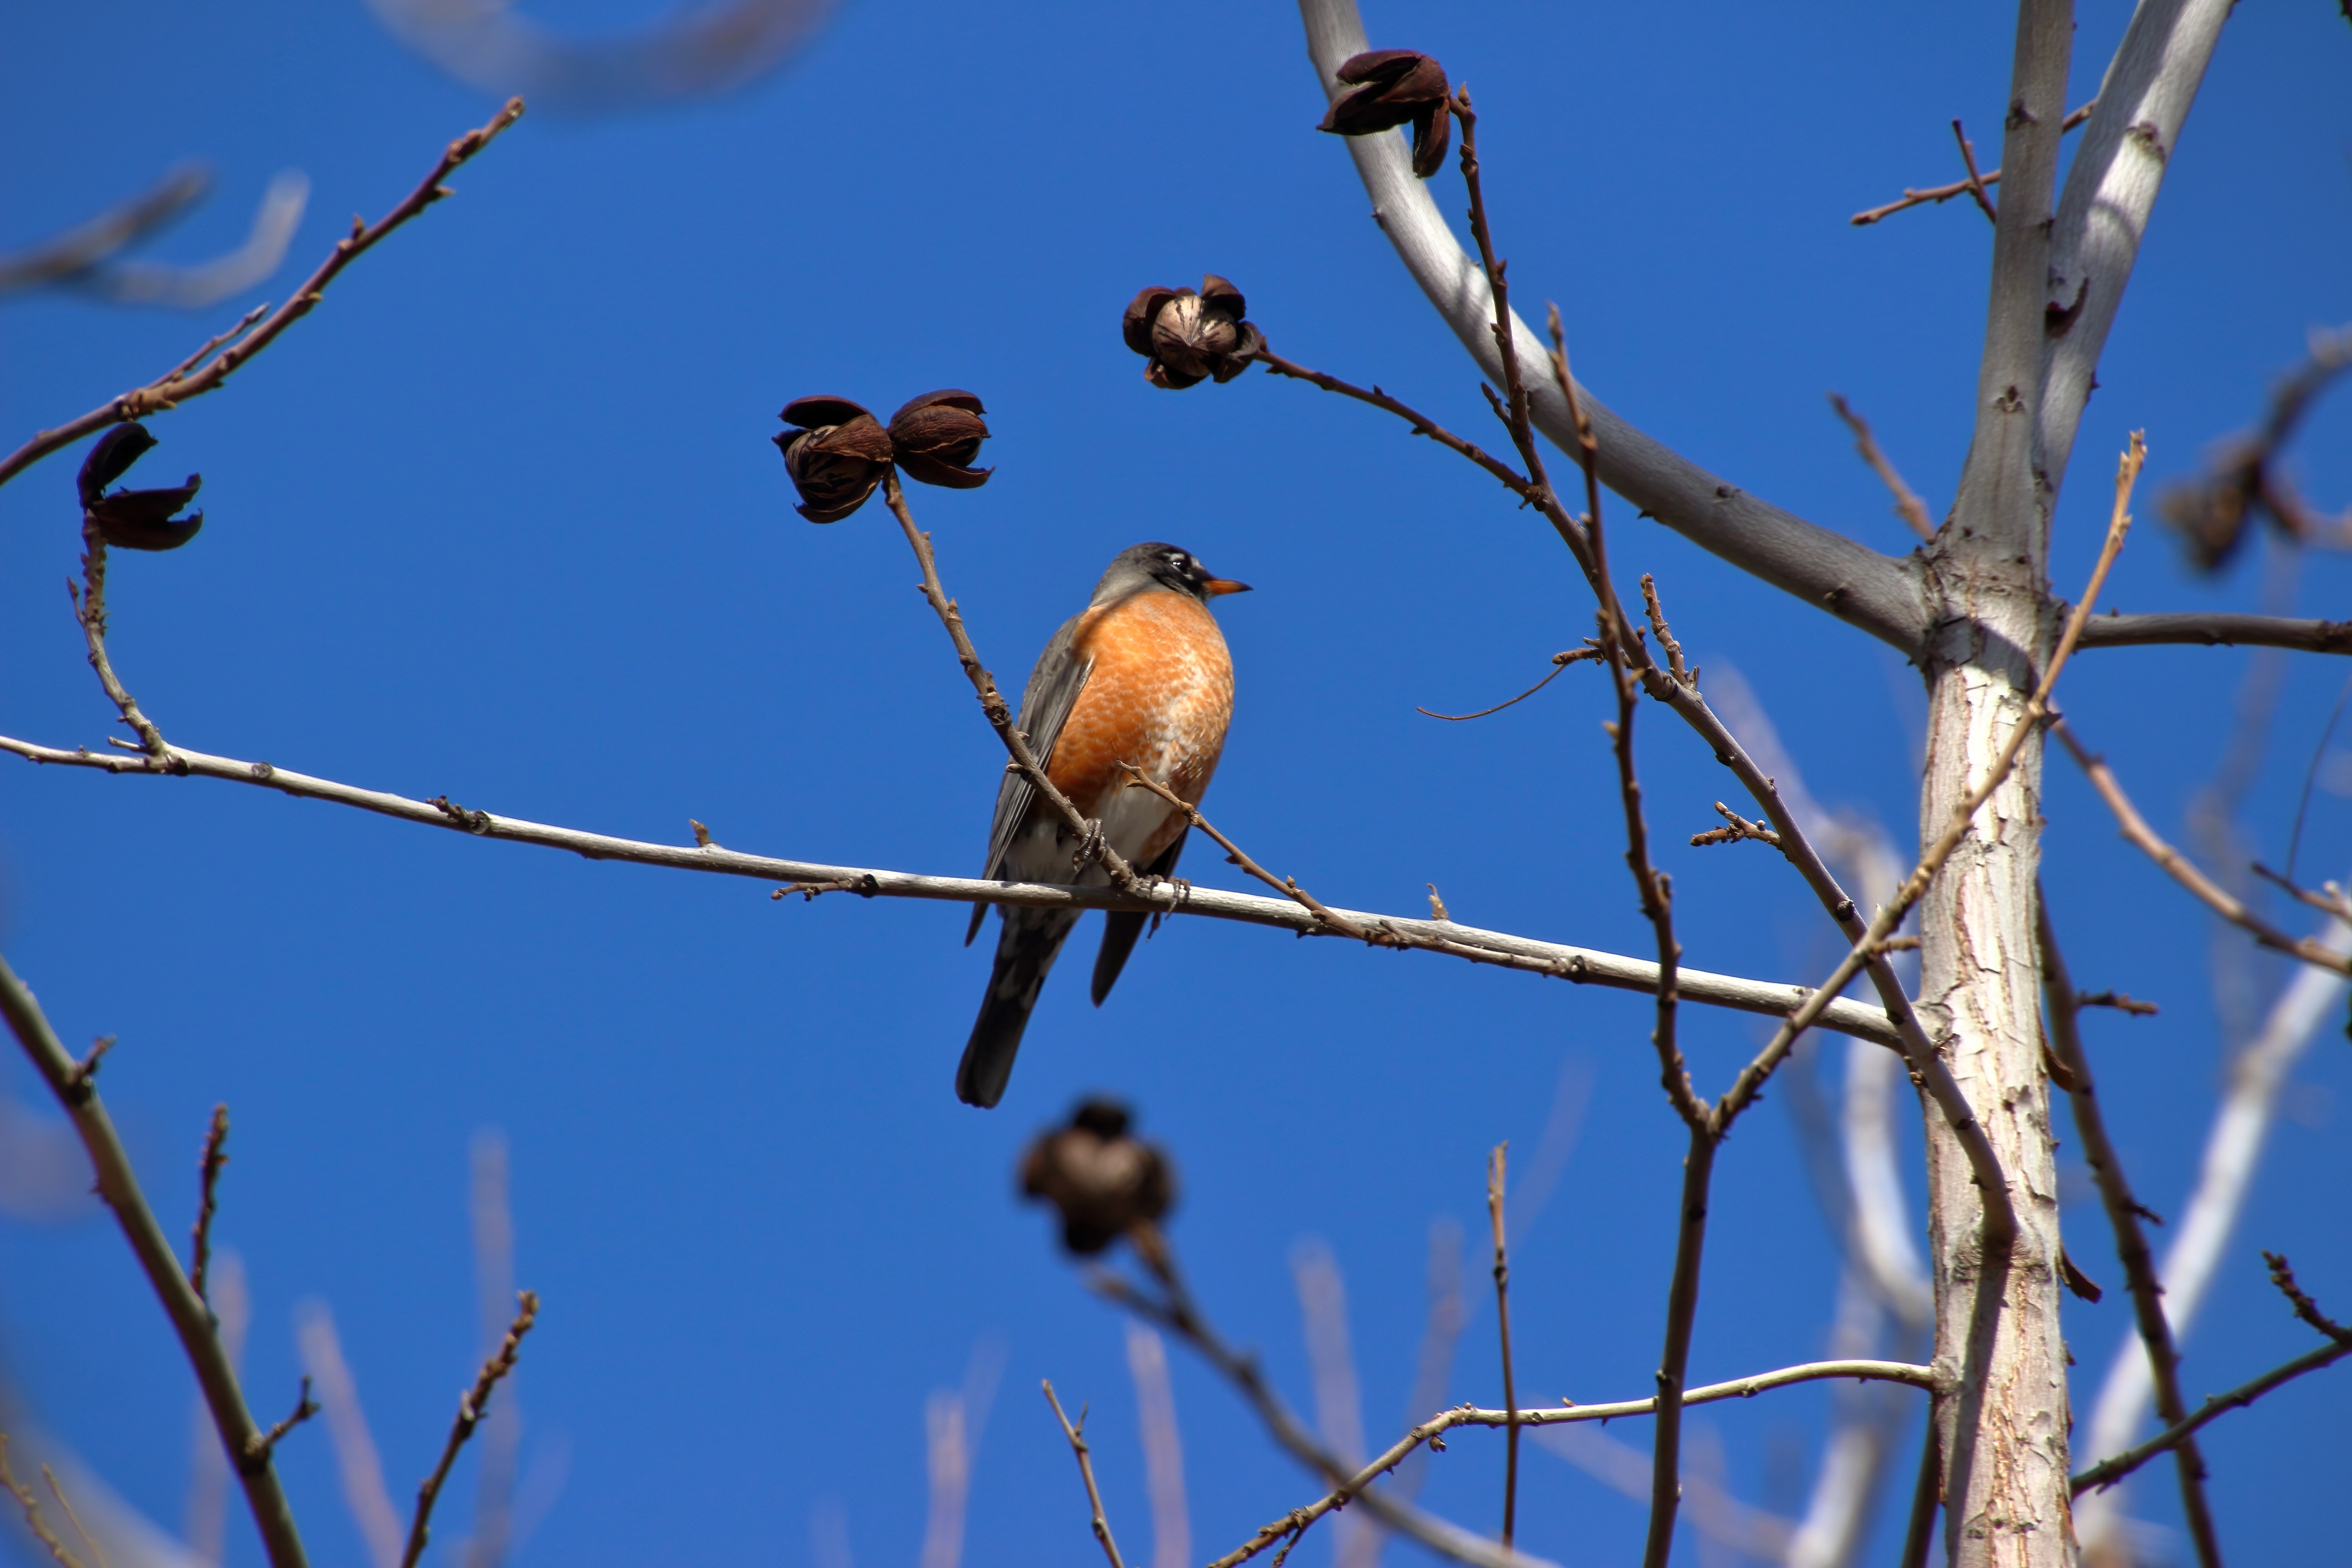 Photo by Tanner Schineller  |  An American Robin amongst the bare branches of a pecan tree.